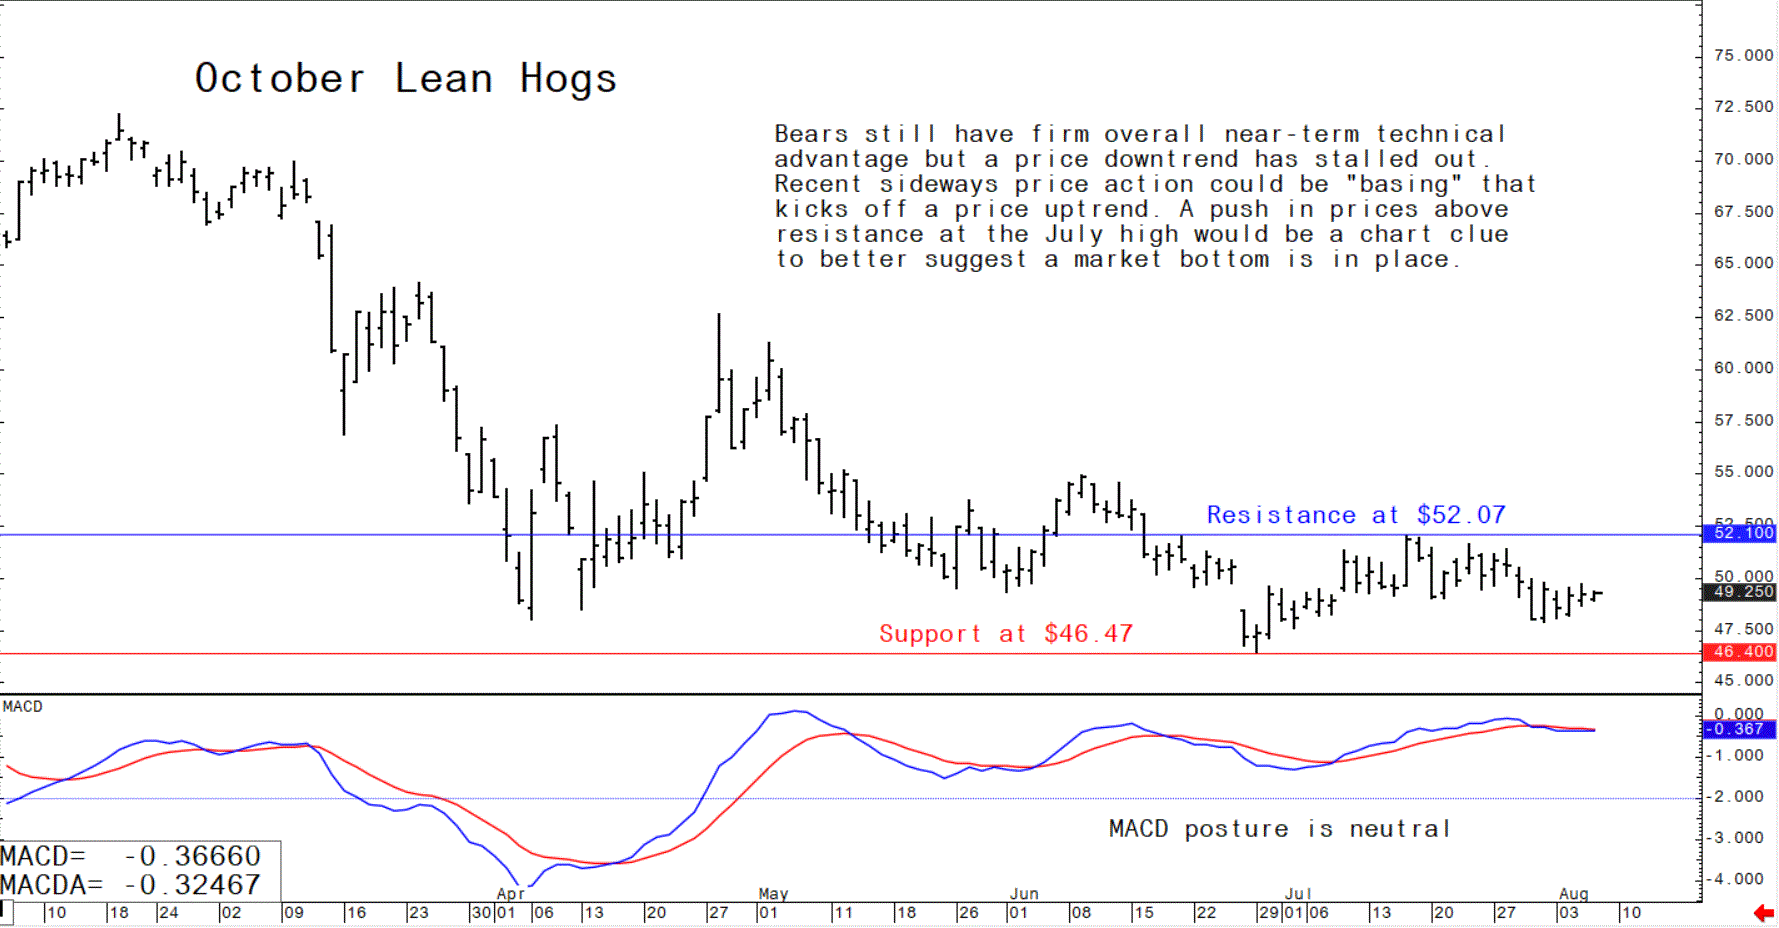 Bears still have firm overall near-term technical advantage but a price downtrend has stalled out. Recent sideways price action could be "basing" that kicks off a price uptrend. A push in prices above resistance at the July high would be a chart clue to better suggest a market bottom is in place.